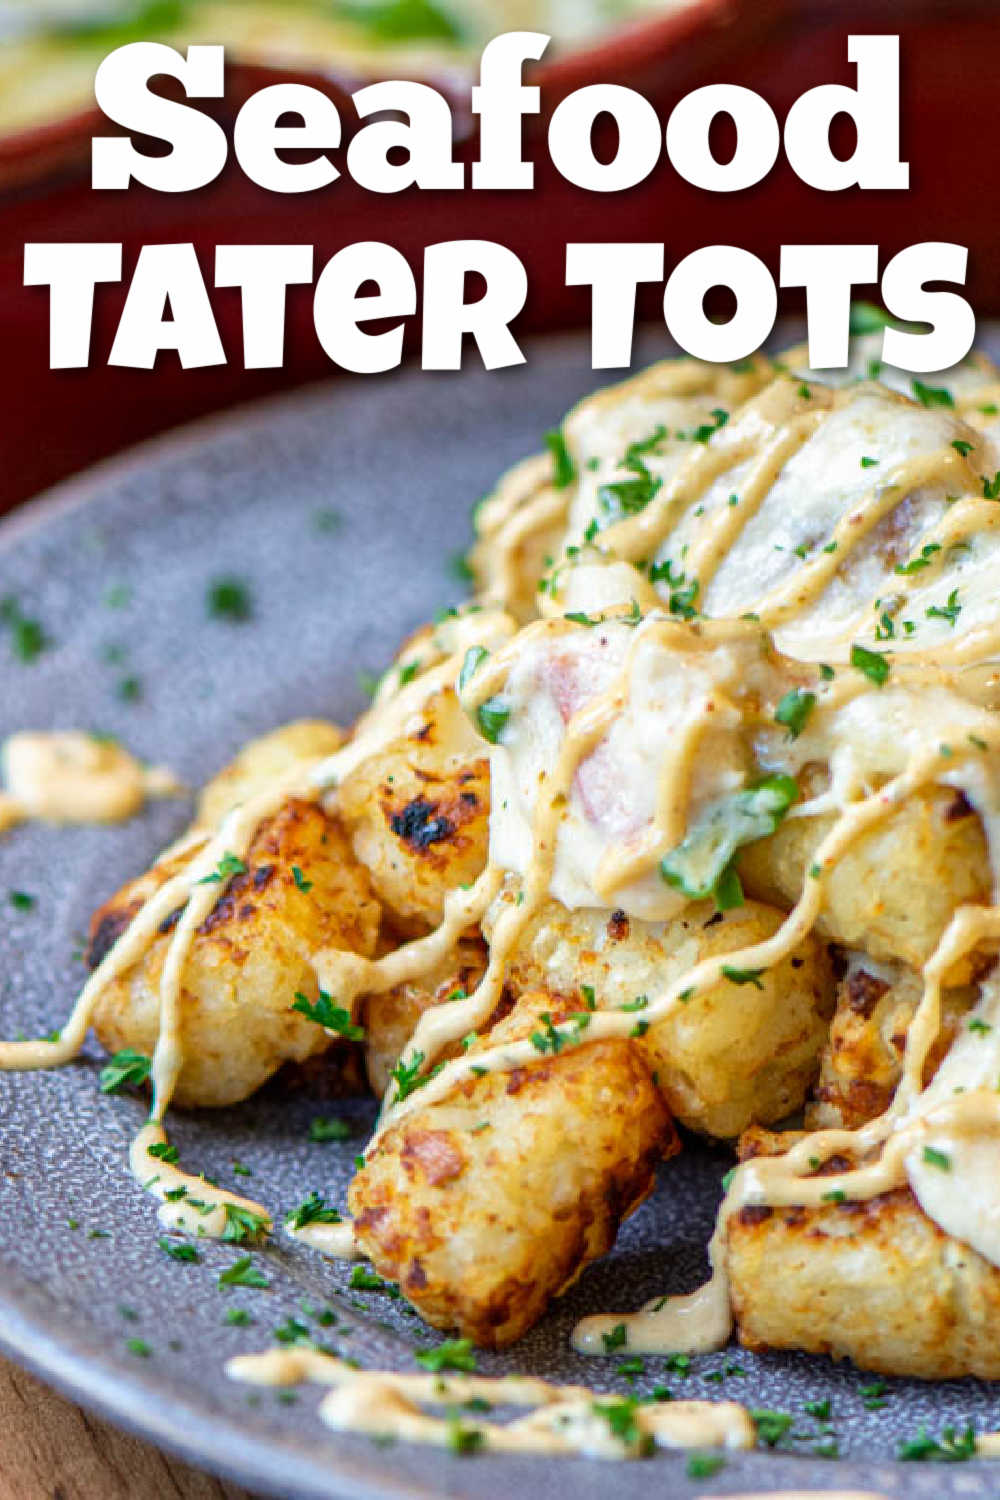 Grilled Seafood Tater Tots with Creamy Remoulade Sauce {50 Minutes}